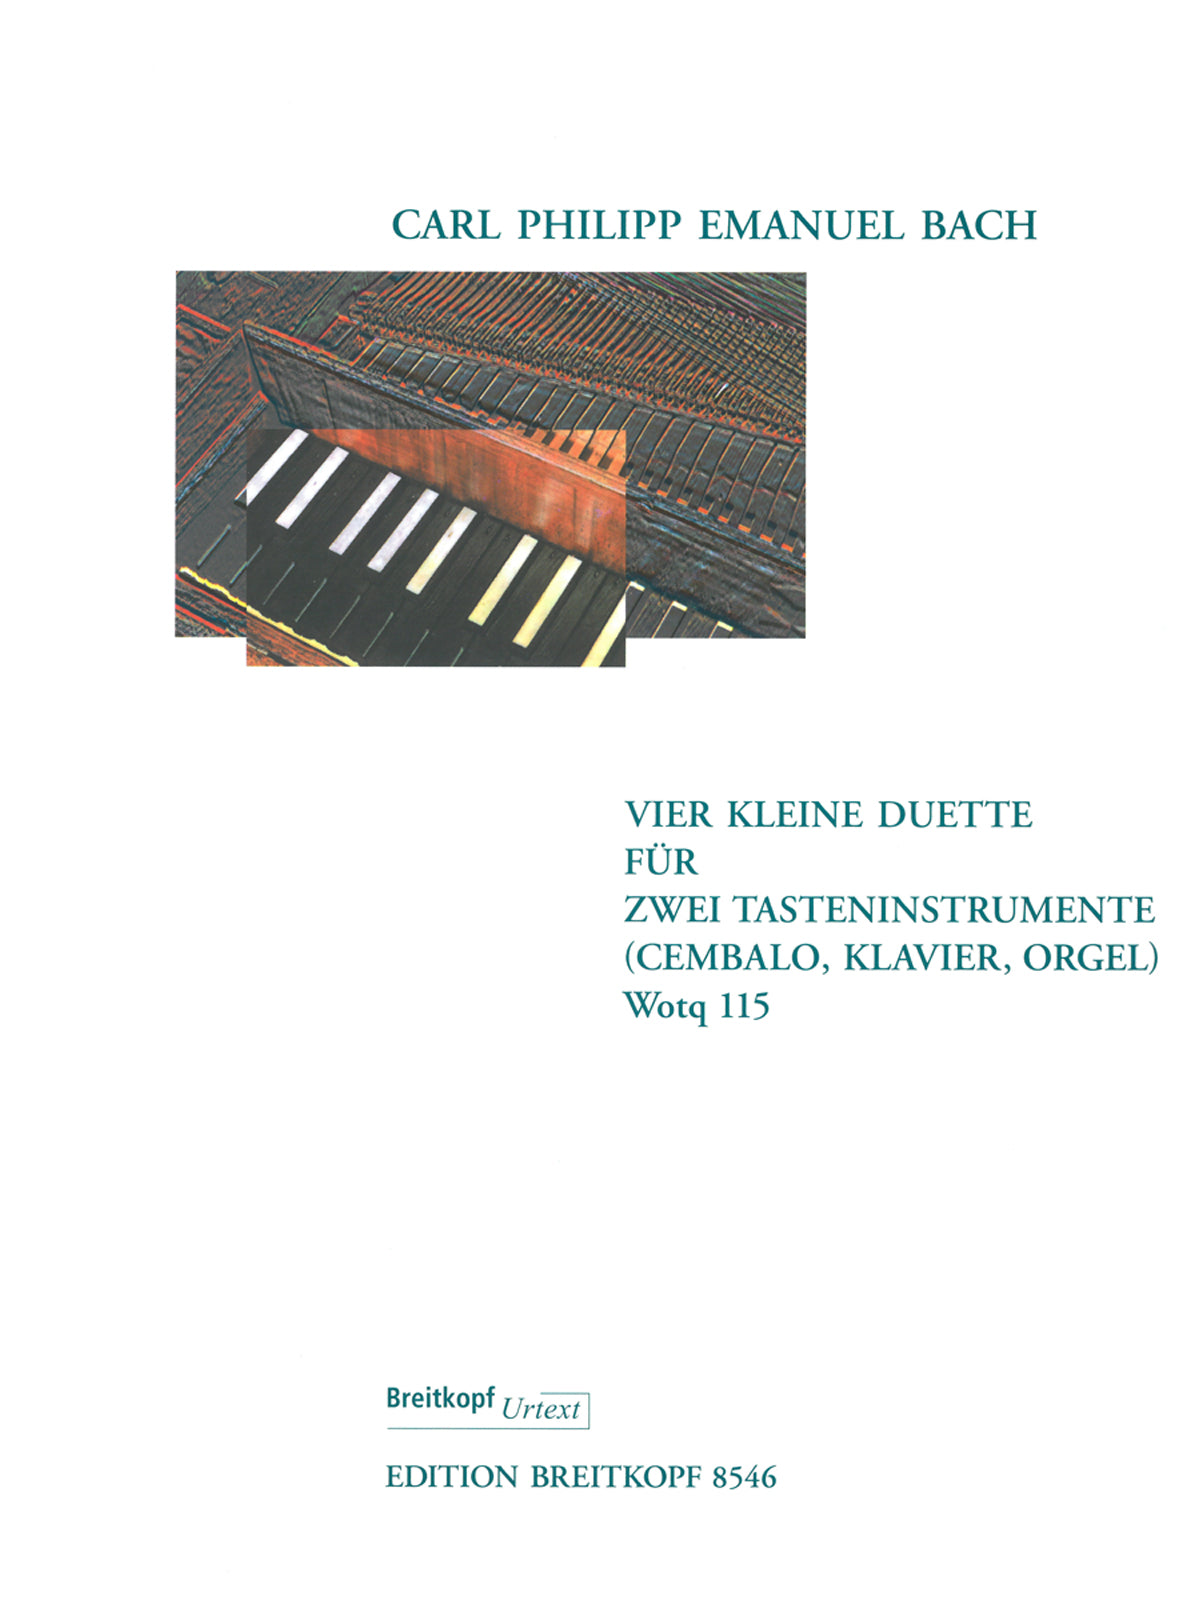 C.P.E. Bach: 4 Small Duets for 2 Keyboard Instruments, Wq. 115